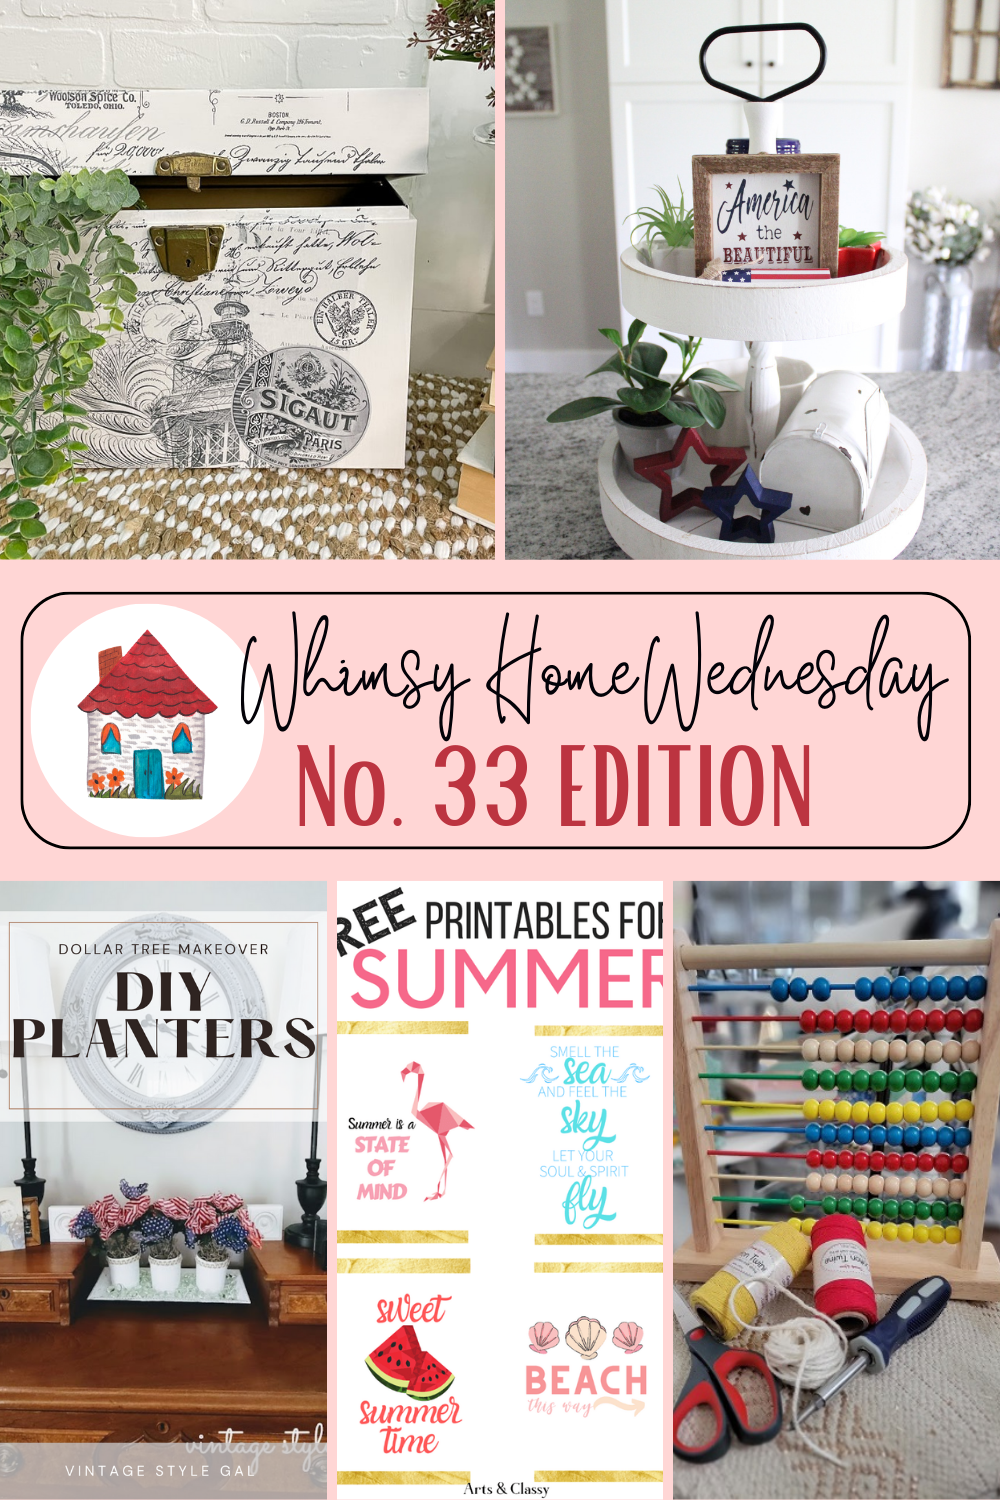 Join us on Whimsy Home Wednesday Blog Link Party No. 33 and see host projects, the features from the previous week and link up your posts!